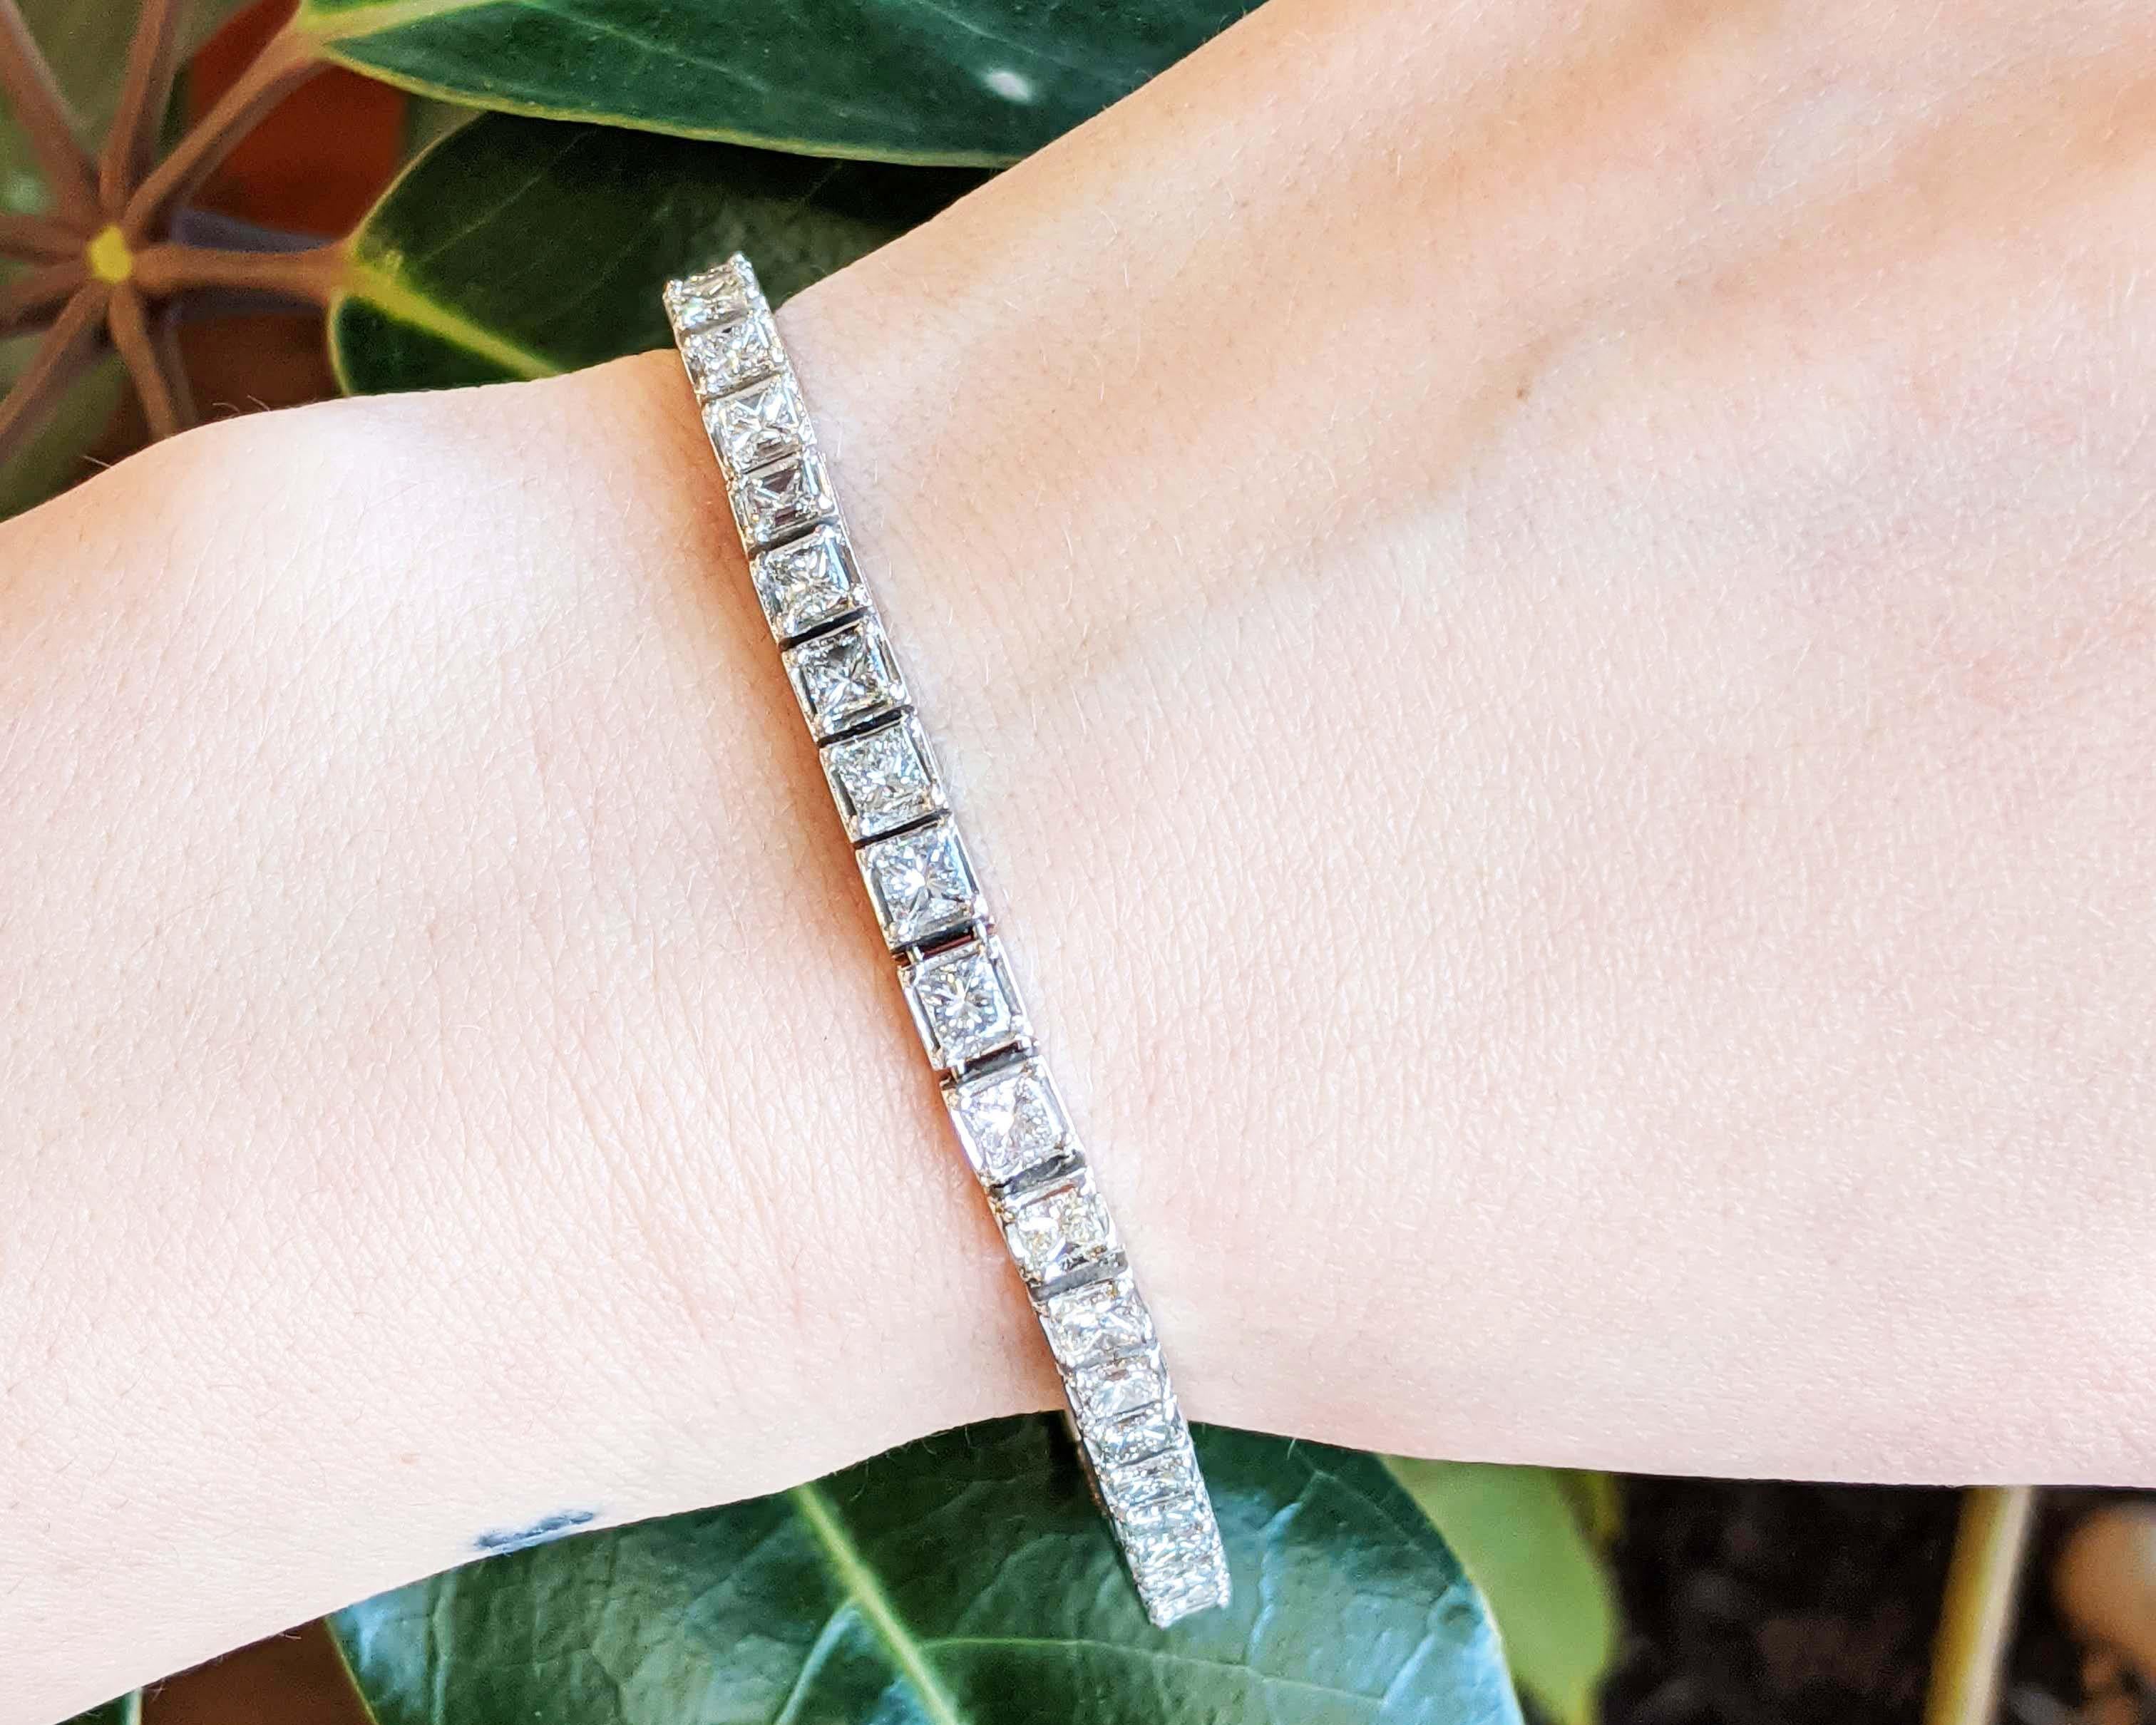 This is an elegant diamond line bracelet in bright white platinum featuring brilliant white princess cut diamonds! This bracelet takes the classic line bracelet look and adds a sparkly spin by using 39 stunning princess cut diamonds. This bracelet